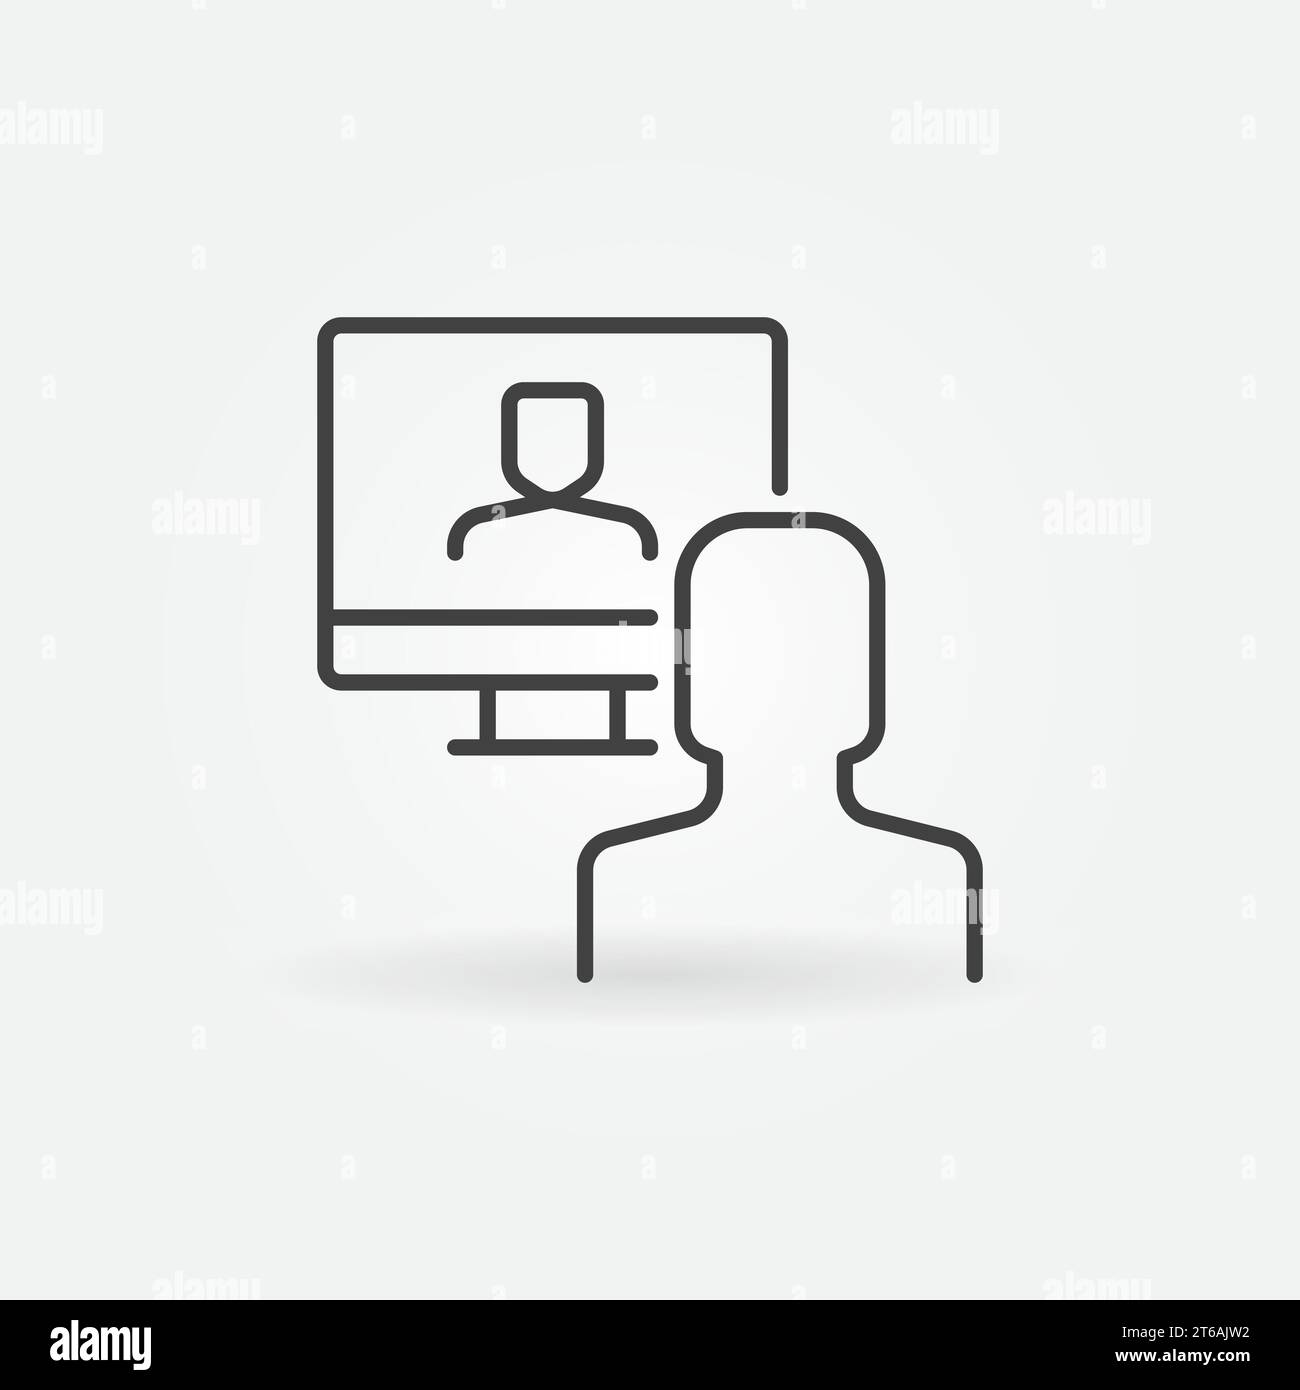 Online Video Conference line icon. Man in front on his computer concept symbol or design element Stock Vector